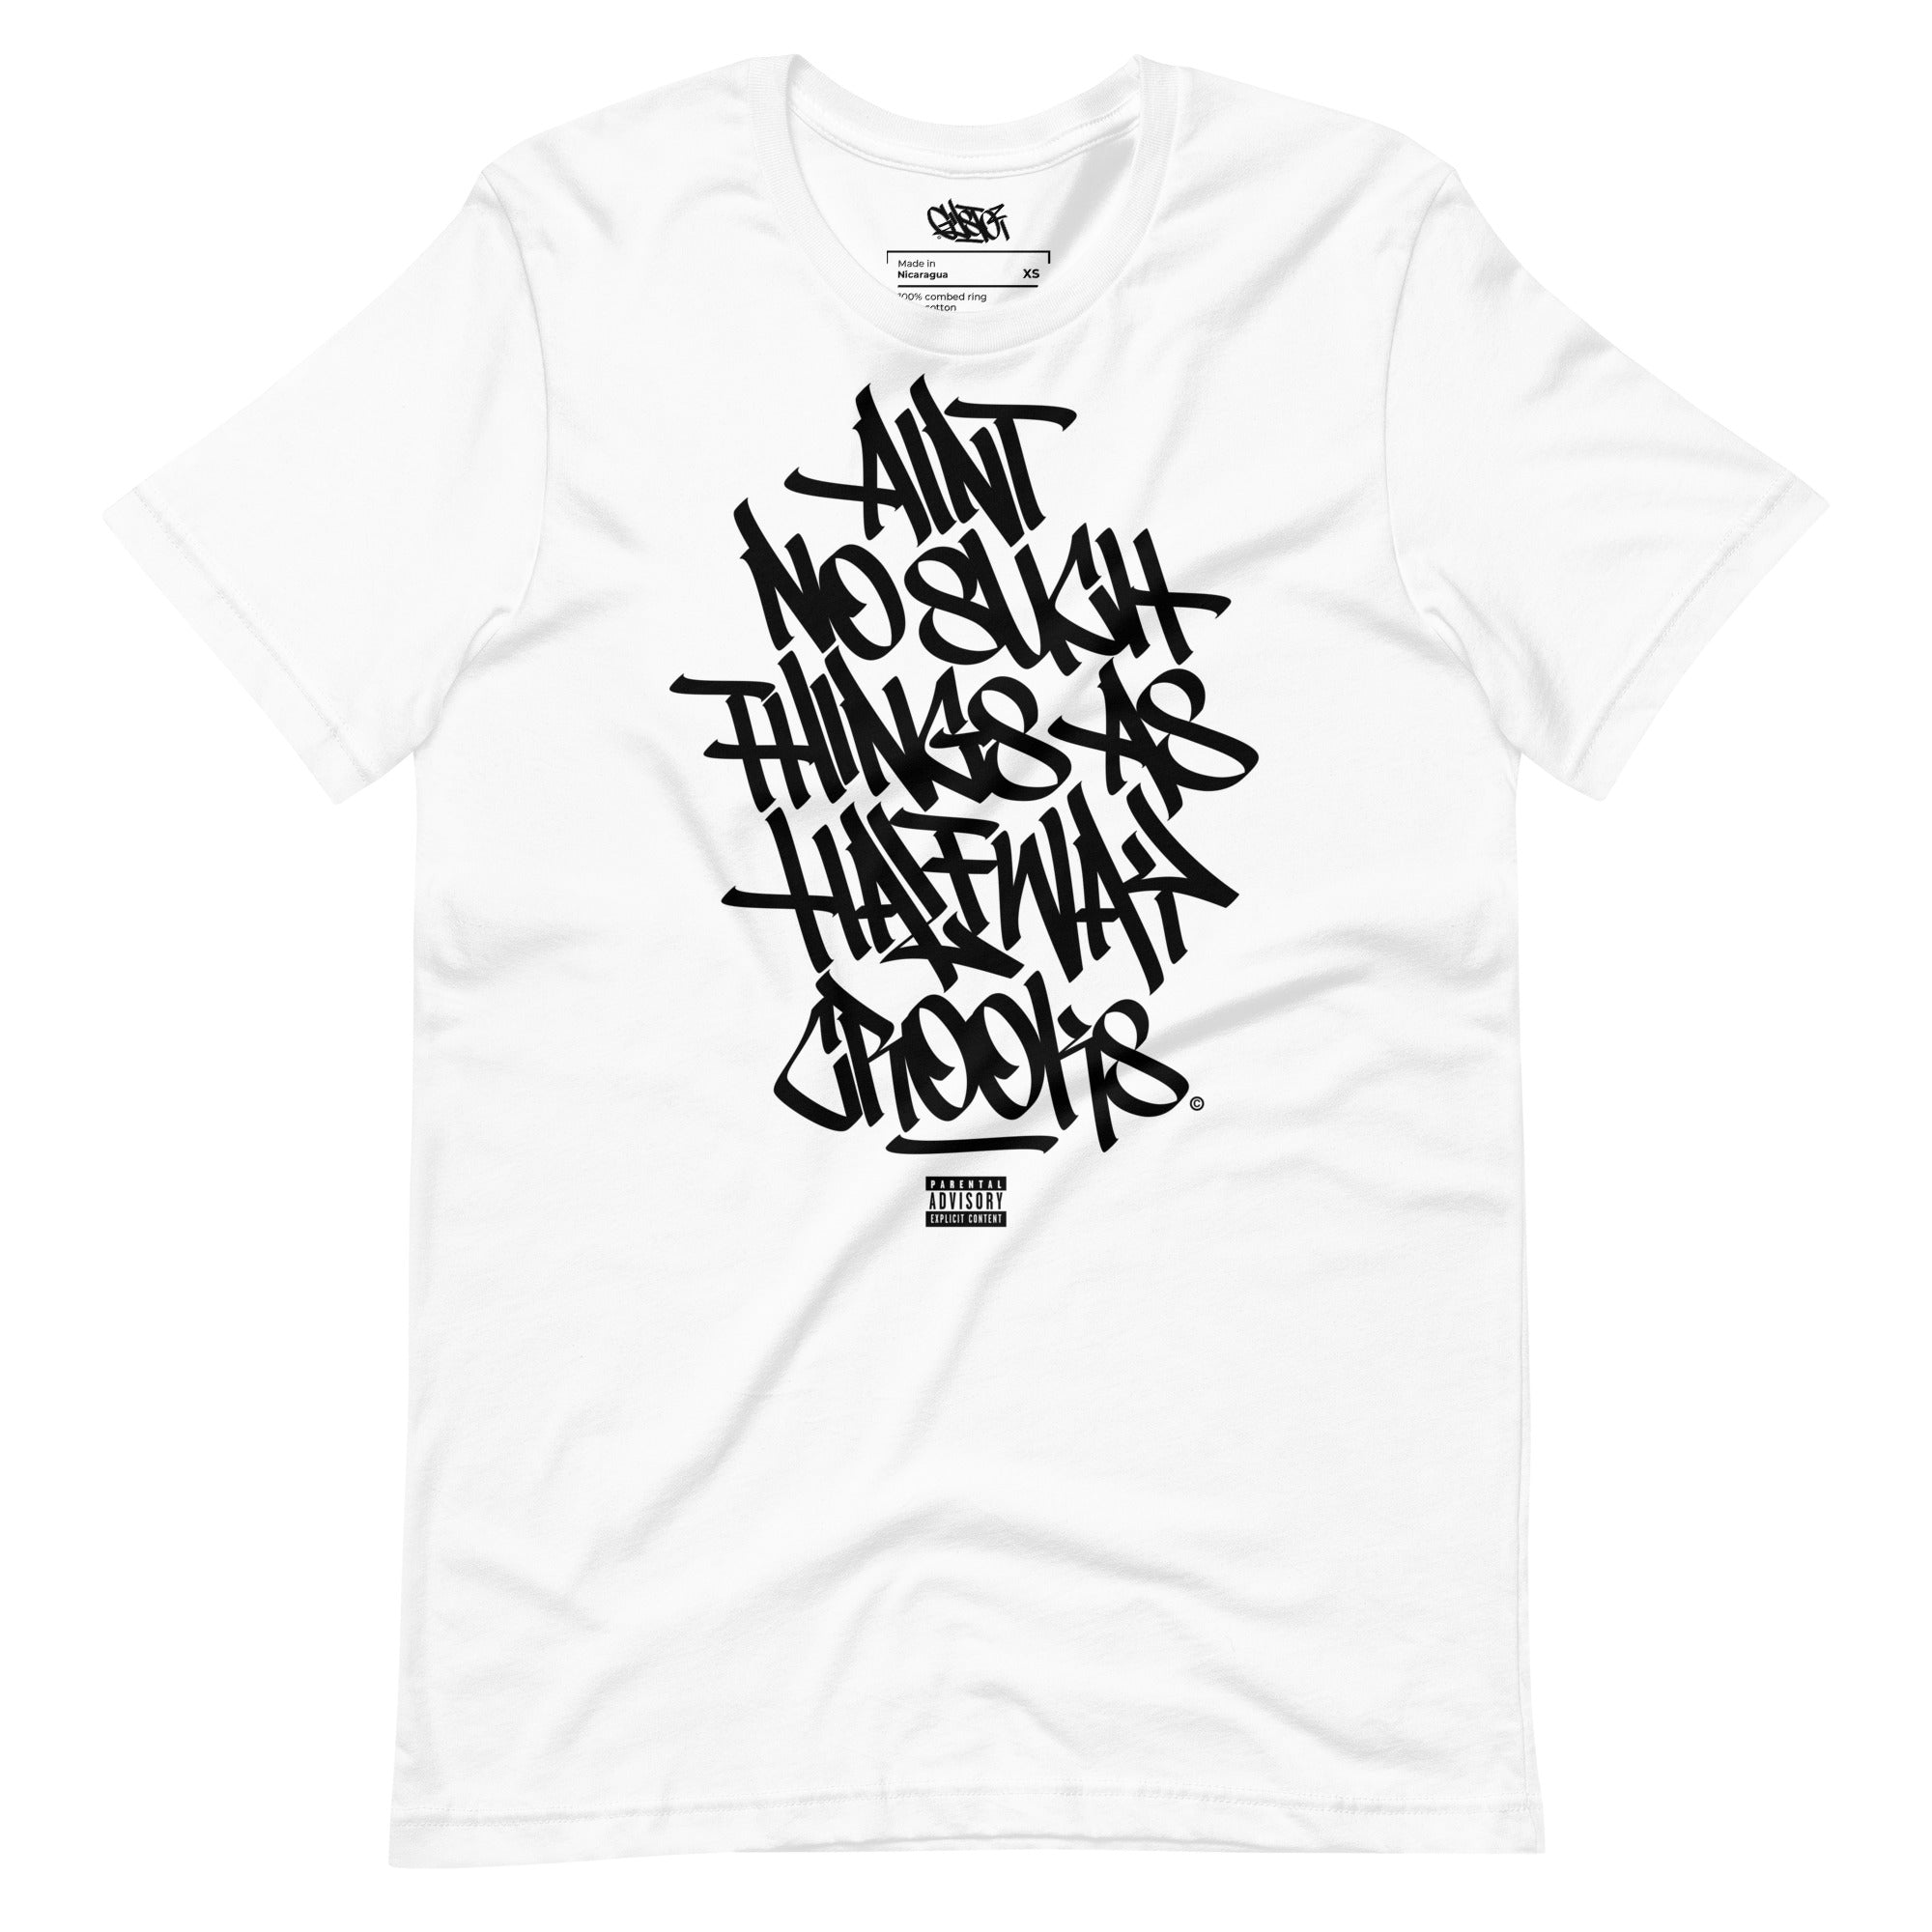 Ain't No Such Things As Halfway Crooks - Unisex T-Shirt - GustoNYC